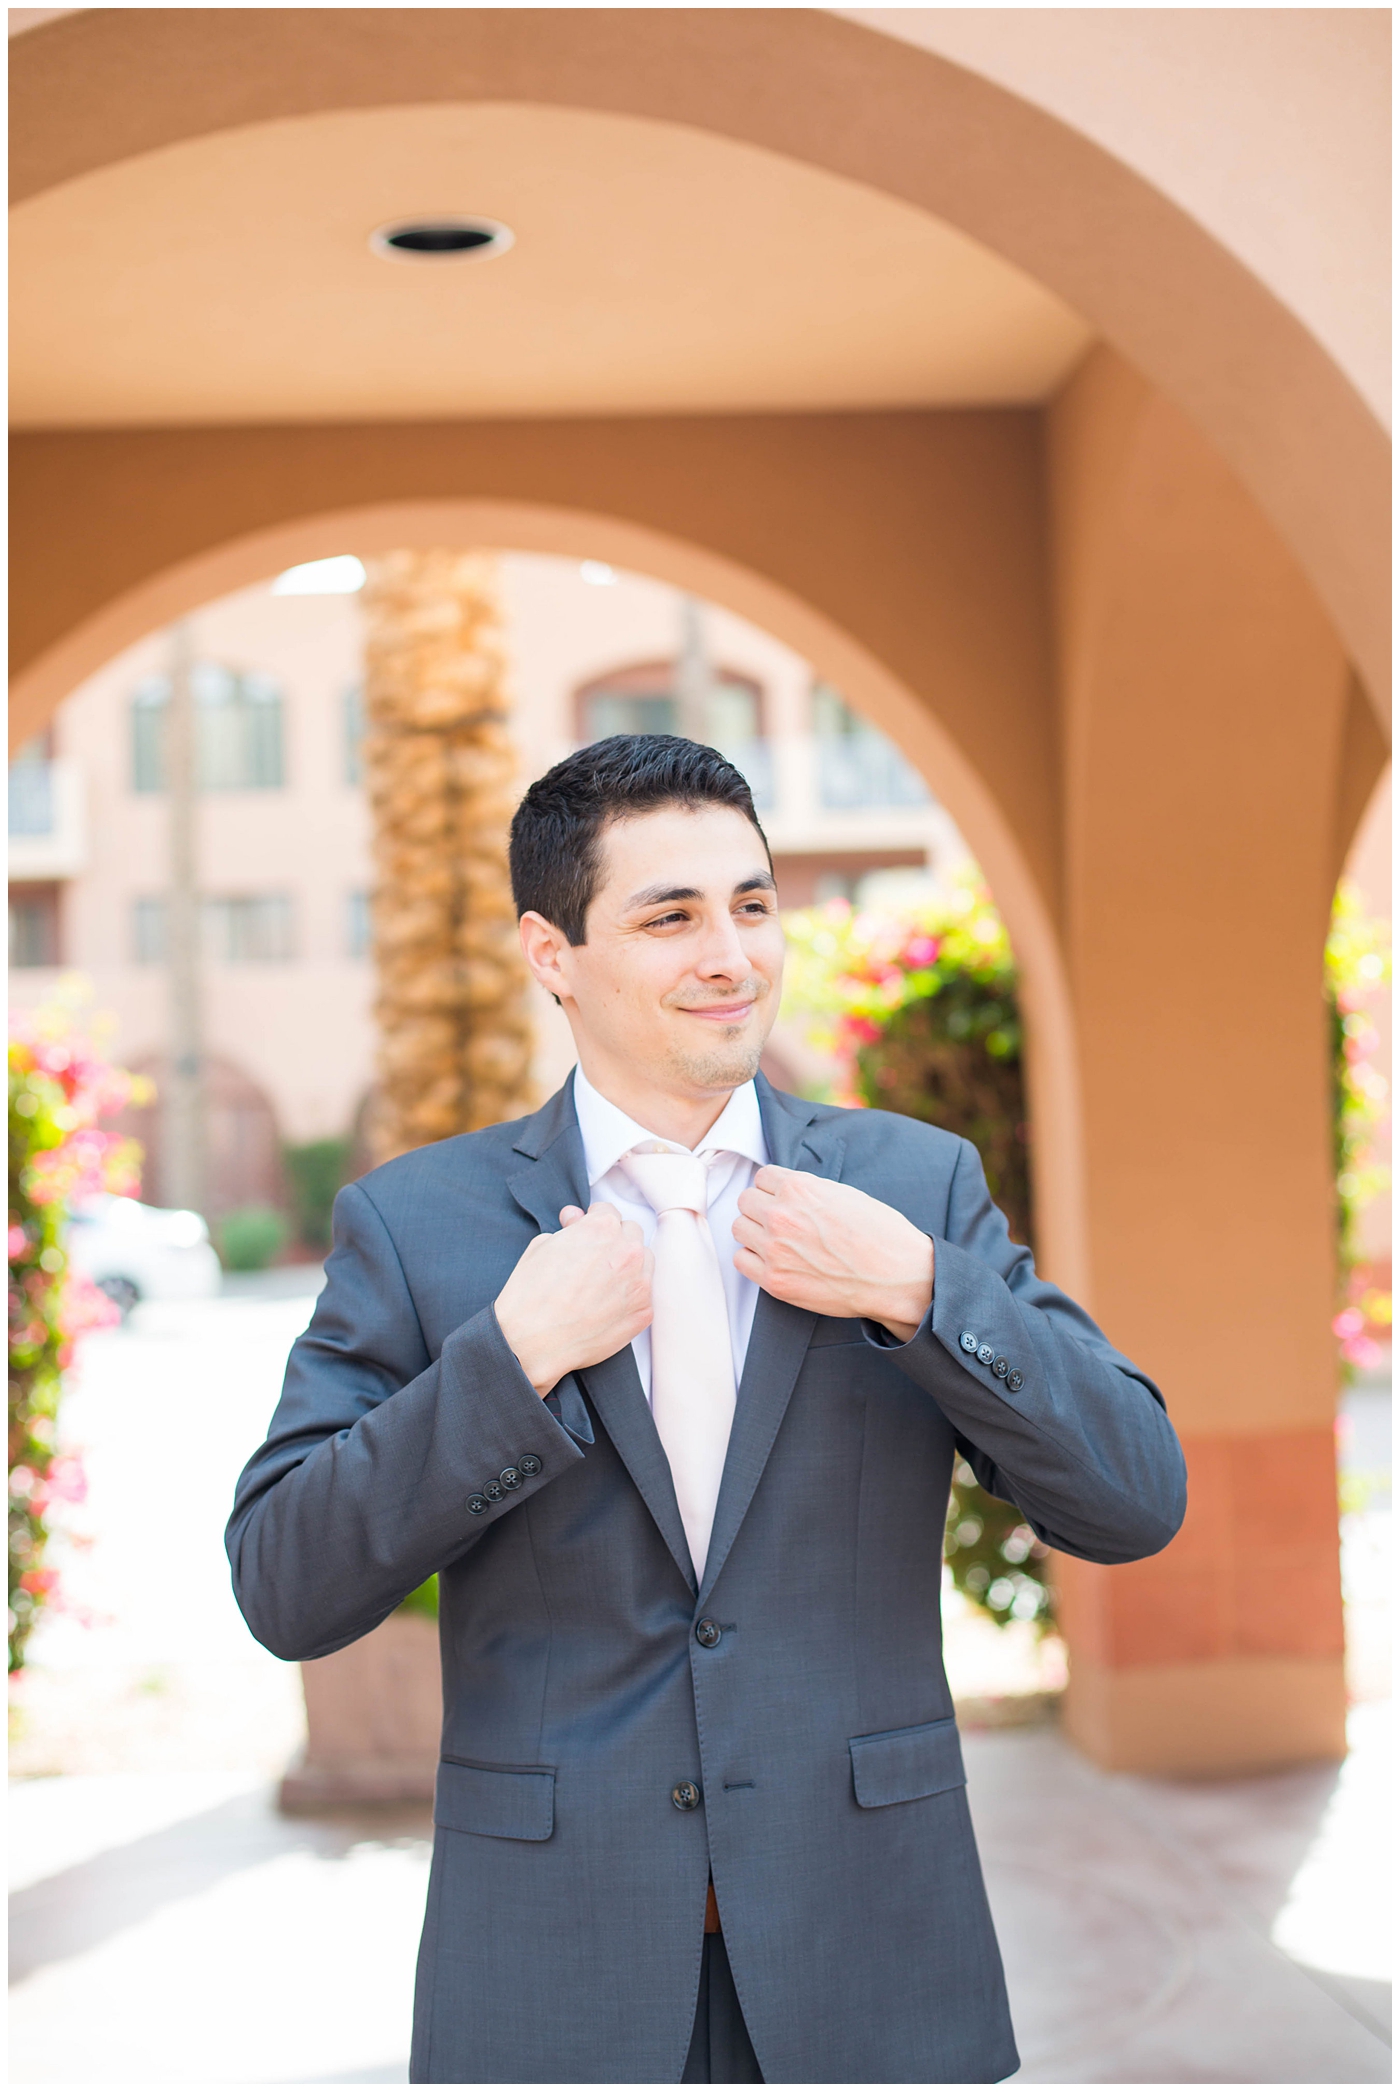 groom in gray suit with pink tie getting ready on wedding day